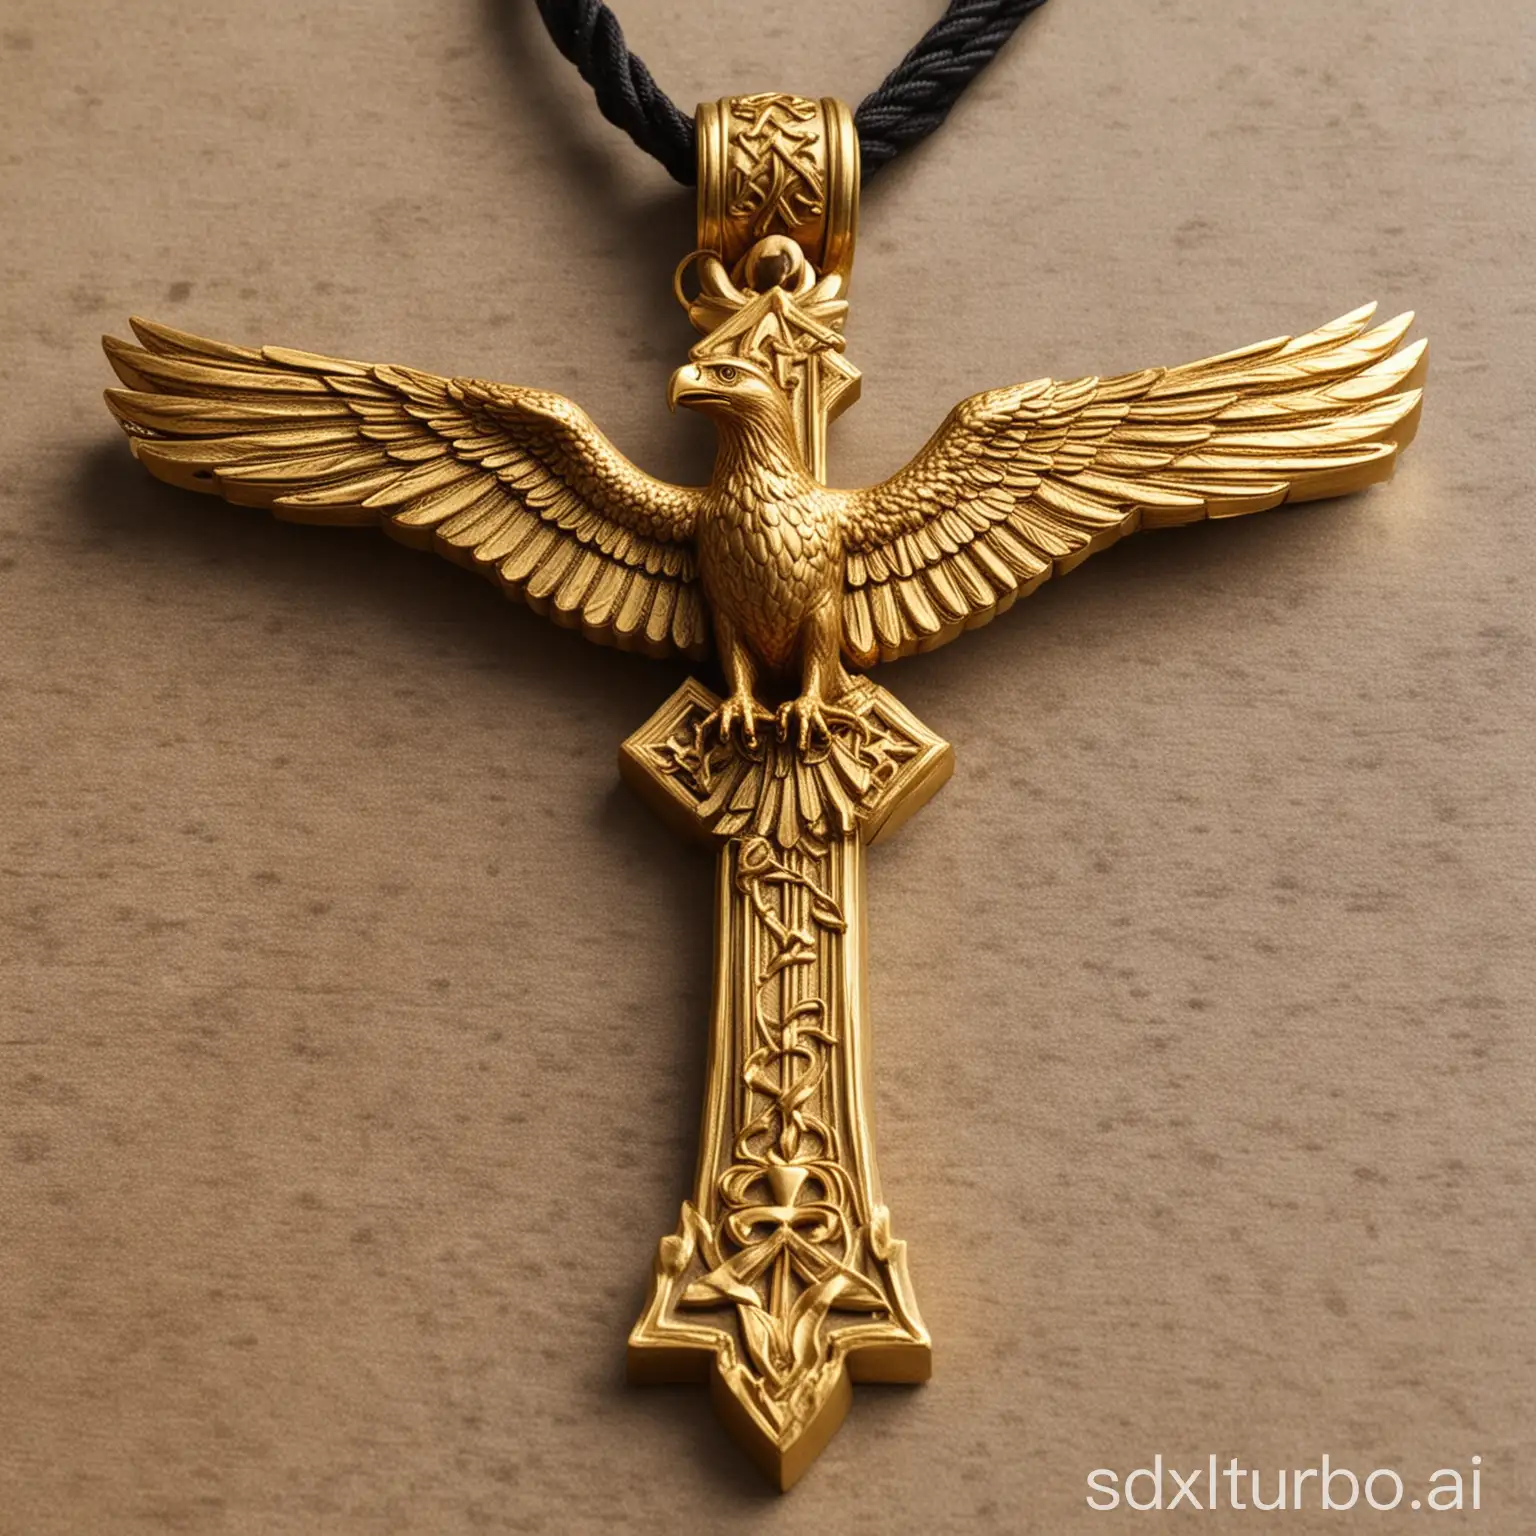 Eagle-Carrying-Golden-Cross-in-All-Directions